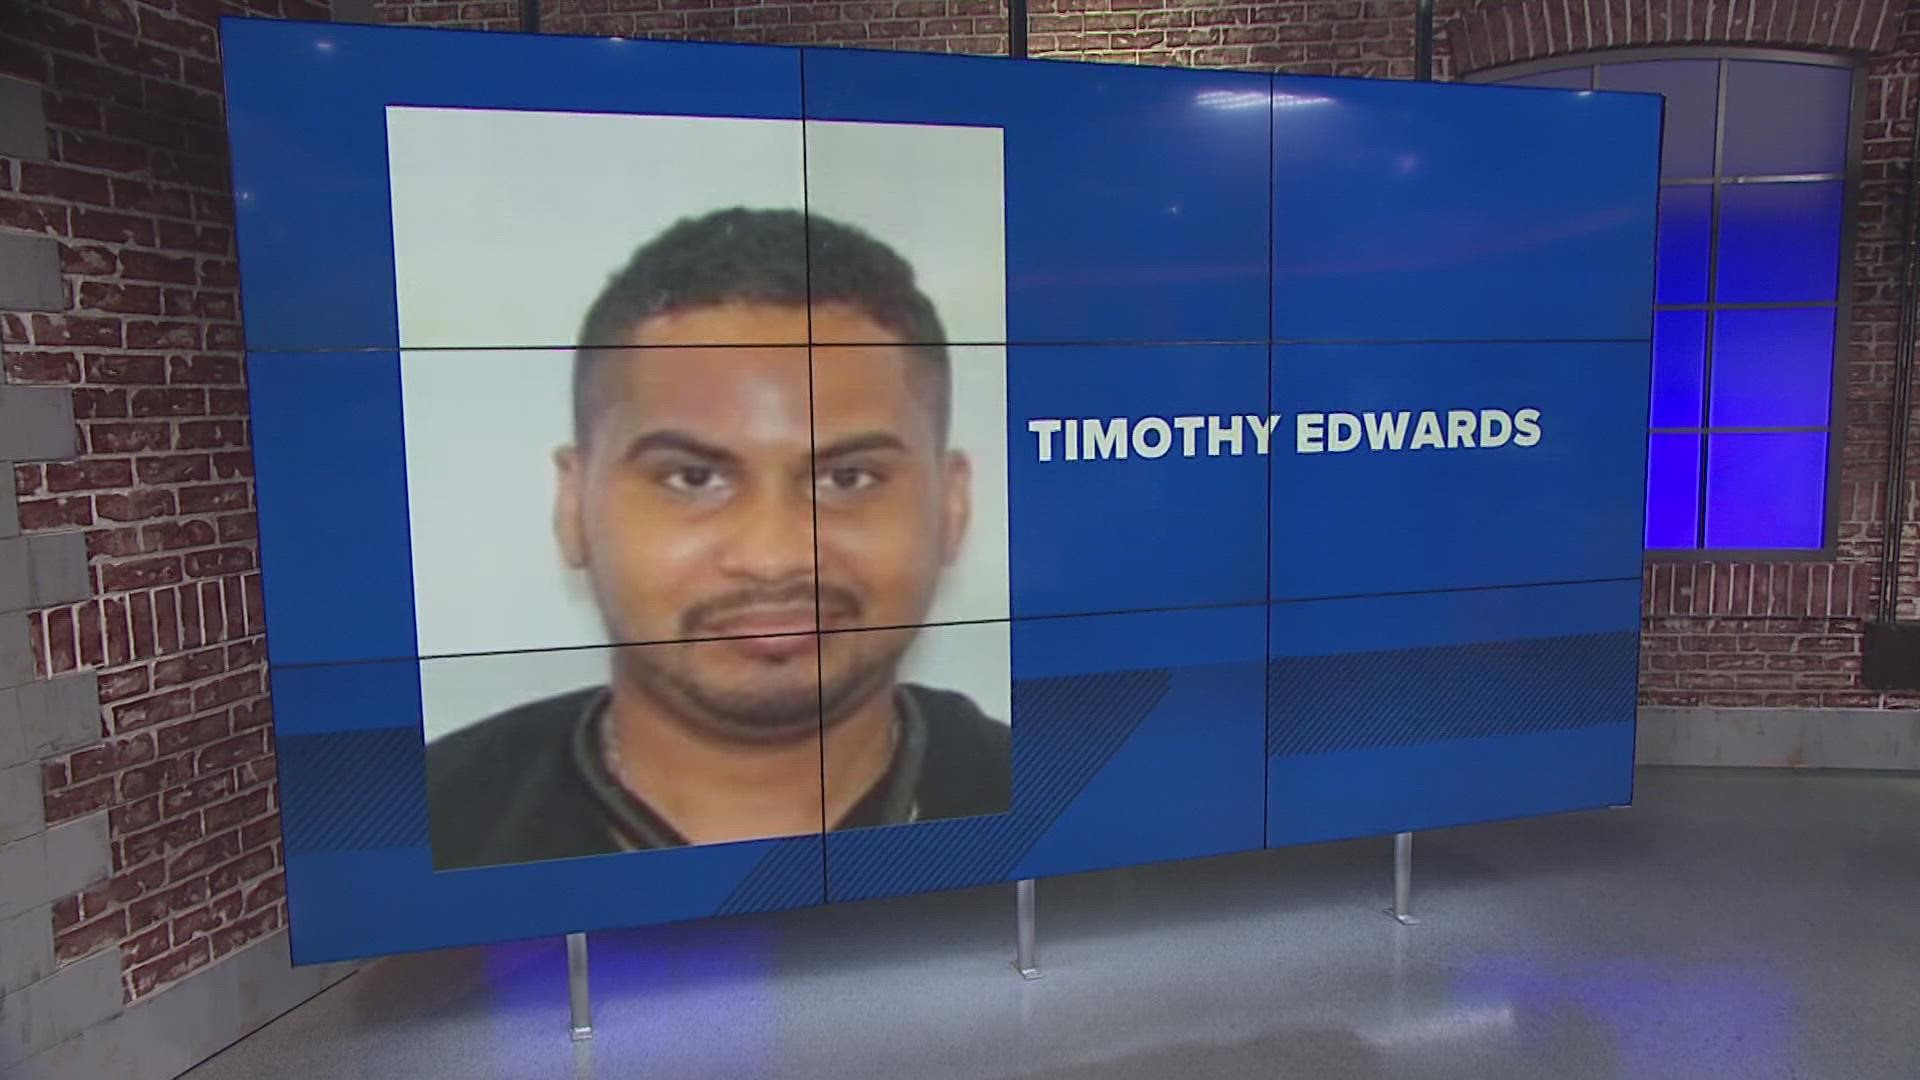 Prosecutors have charged 34-year-old Timothy Edwards with killing his own sister.